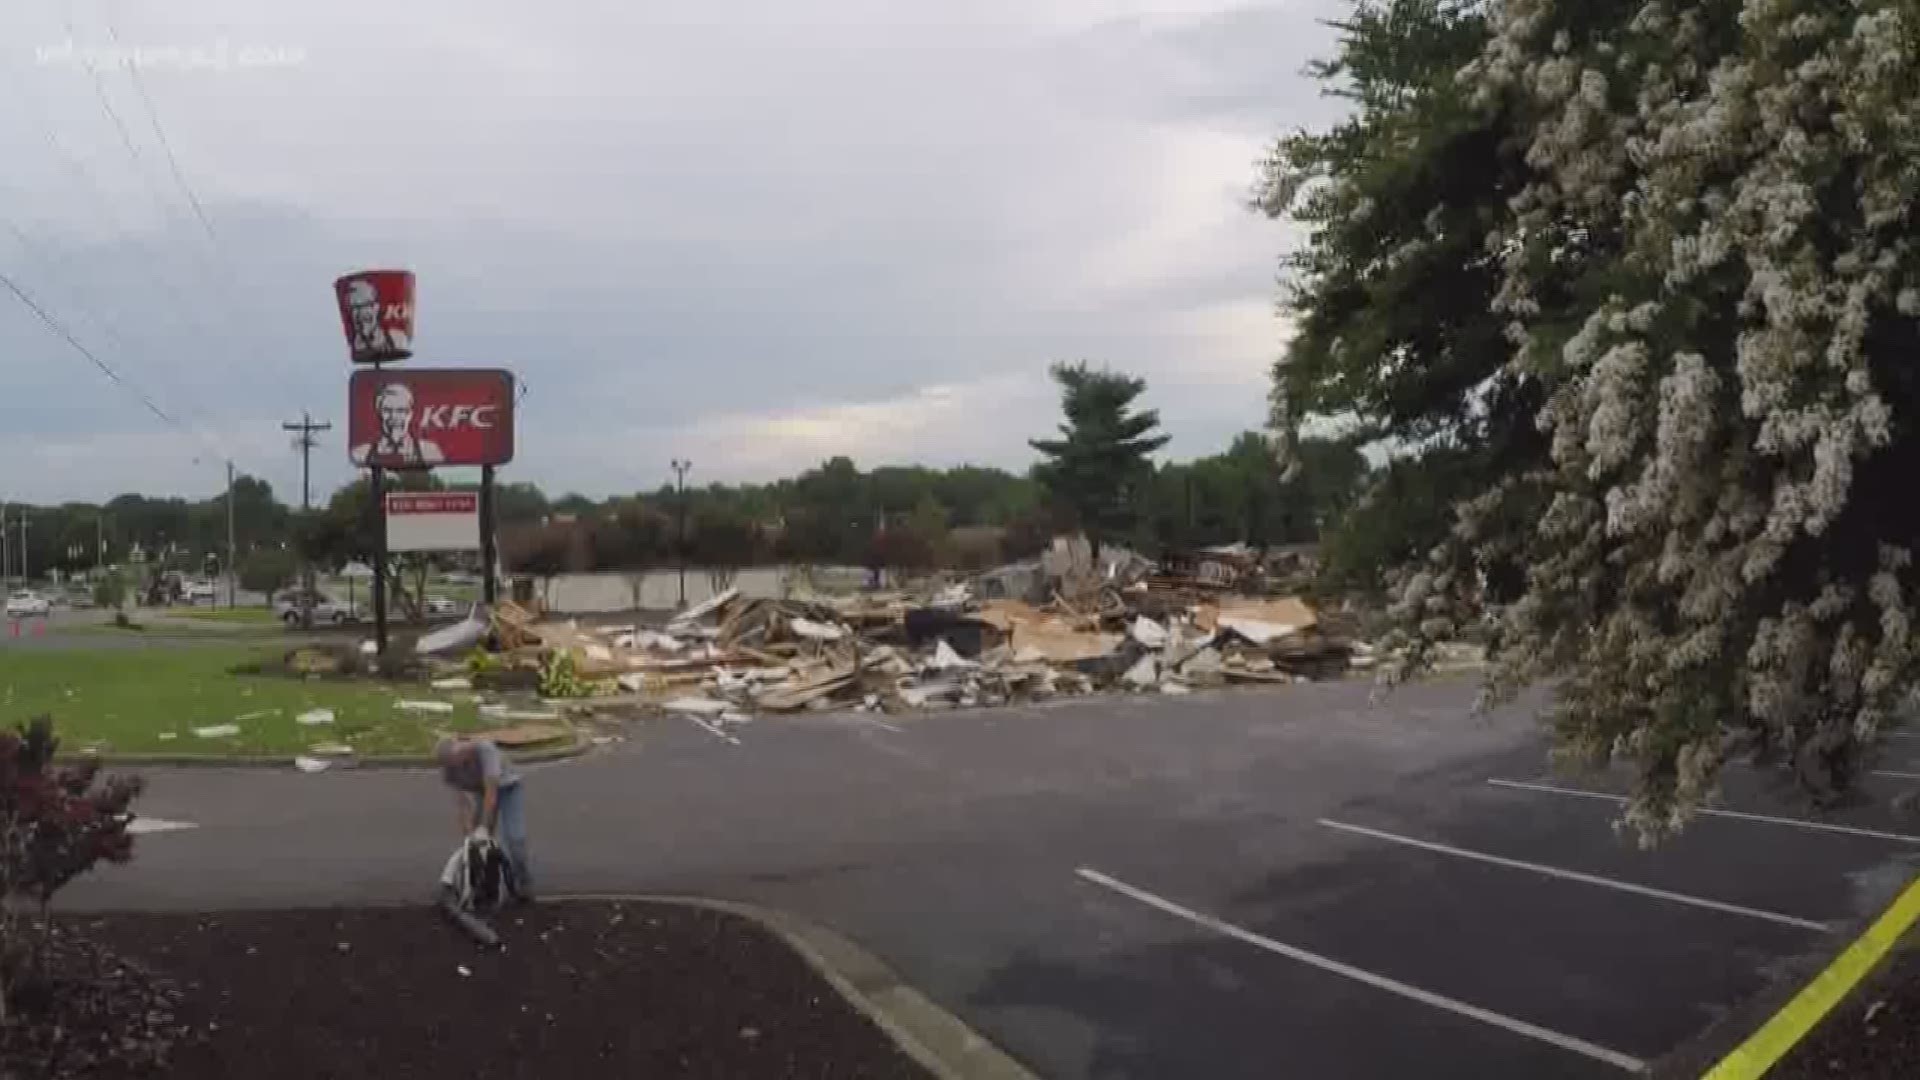 Investigators are still trying to figure out what caused the massive explosion at the Eden KFC